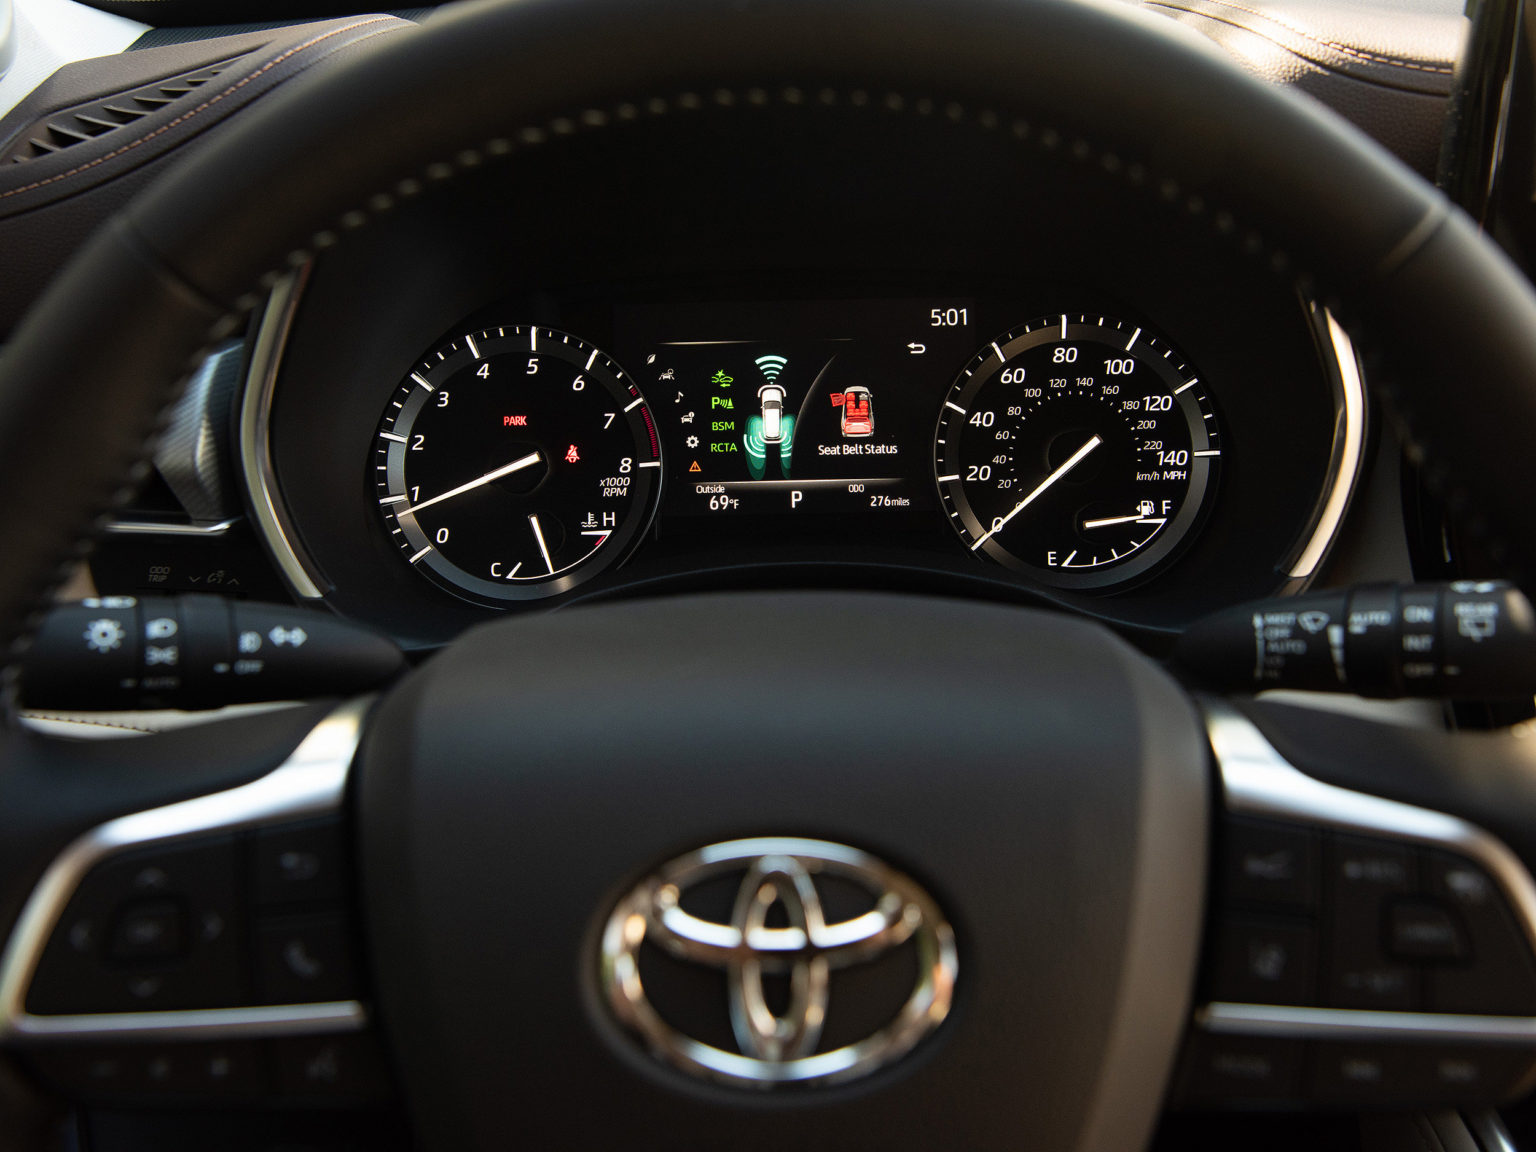 Toyota Safety Sense 2.0 delivers new safety and driver assistance tech to the company's 2021 model lineup.